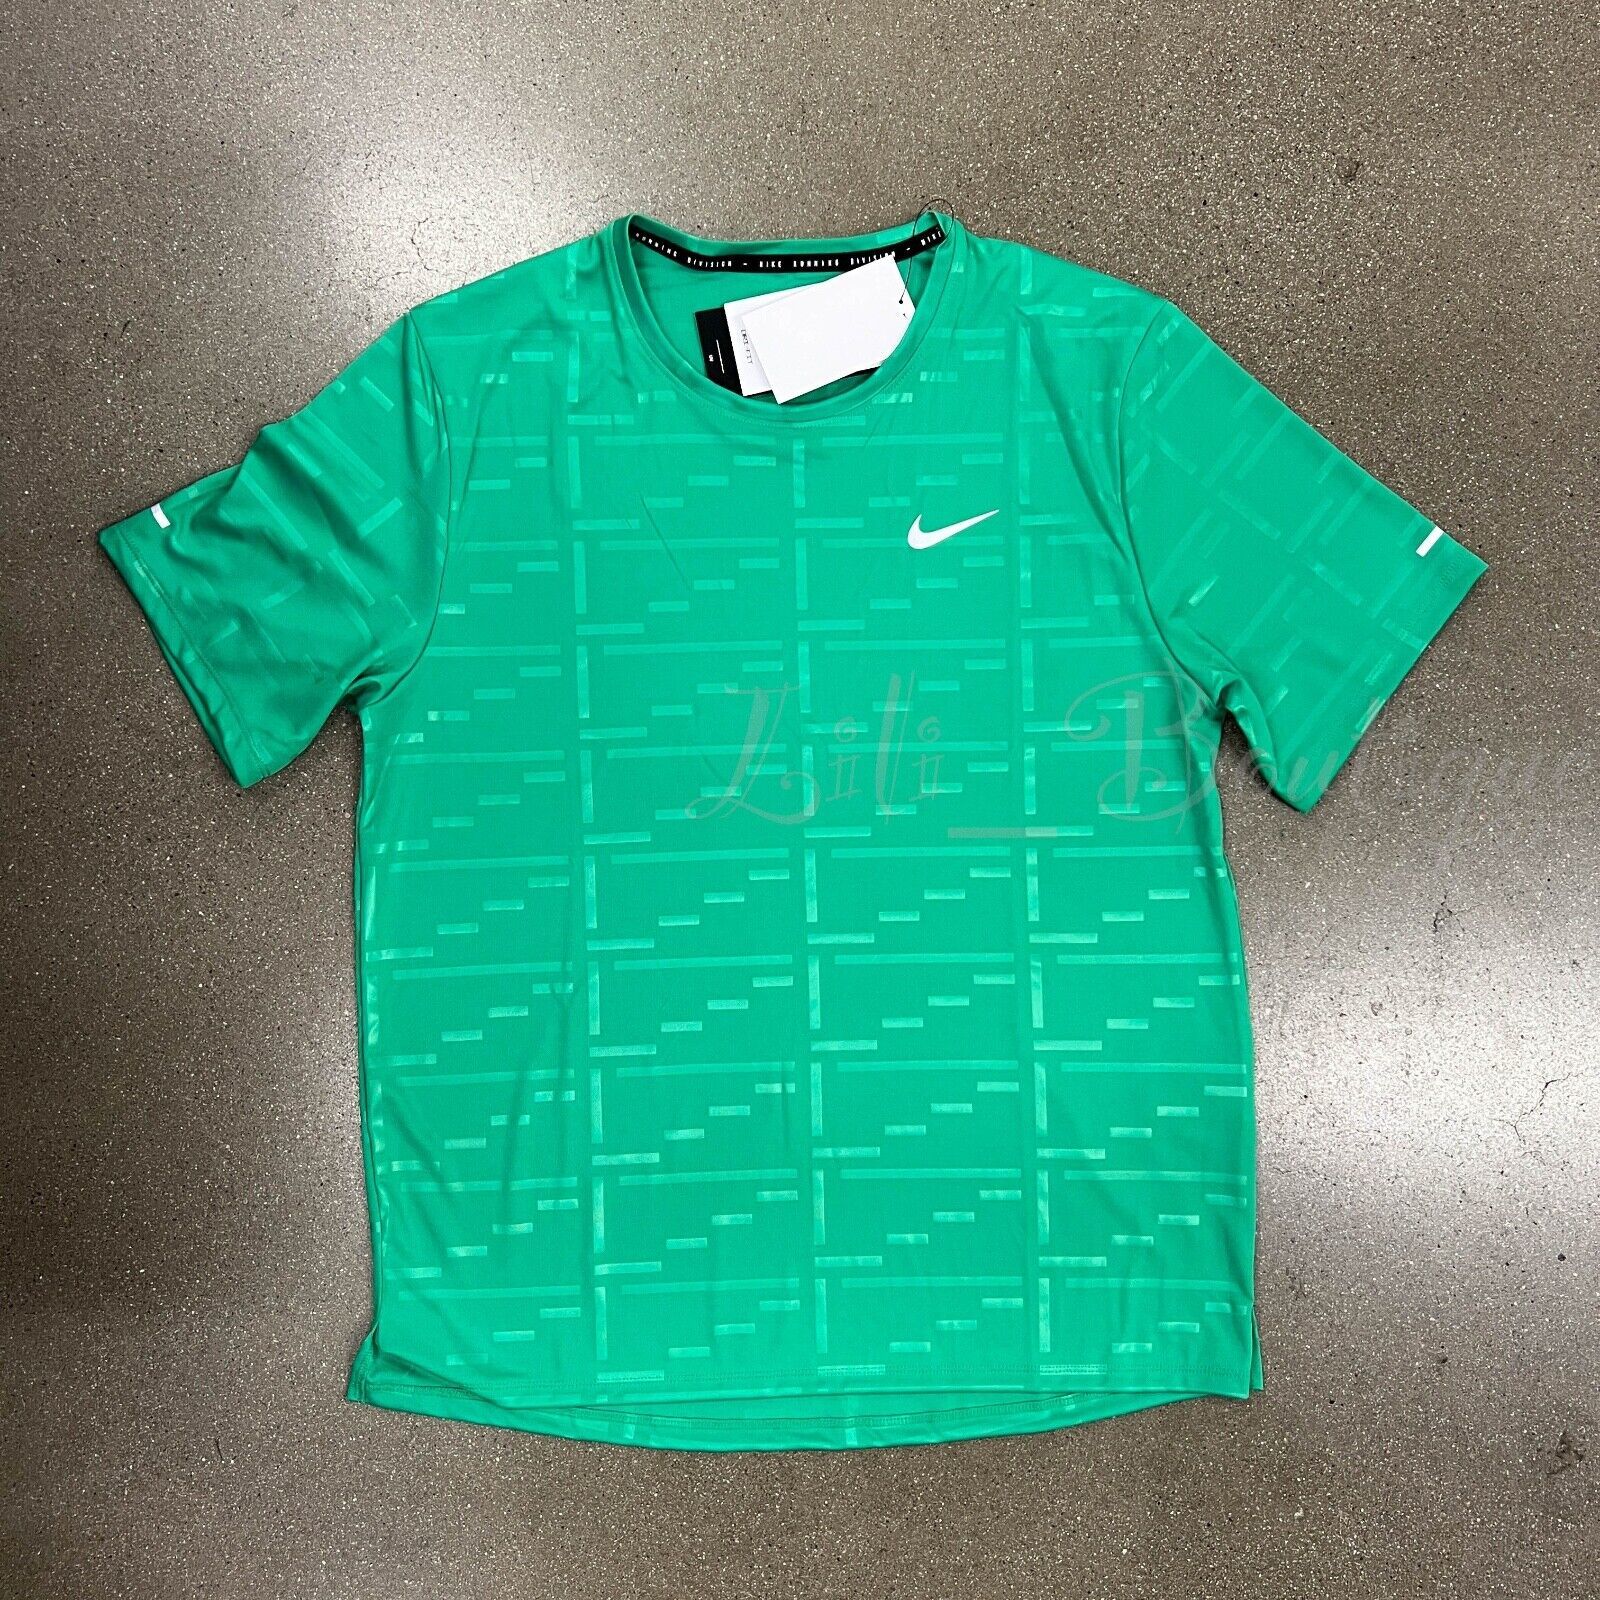 Primary image for NWT Nike DV8104-372 Men Dri-FIT UV Running Division Miler Tee Shirt Green Size L